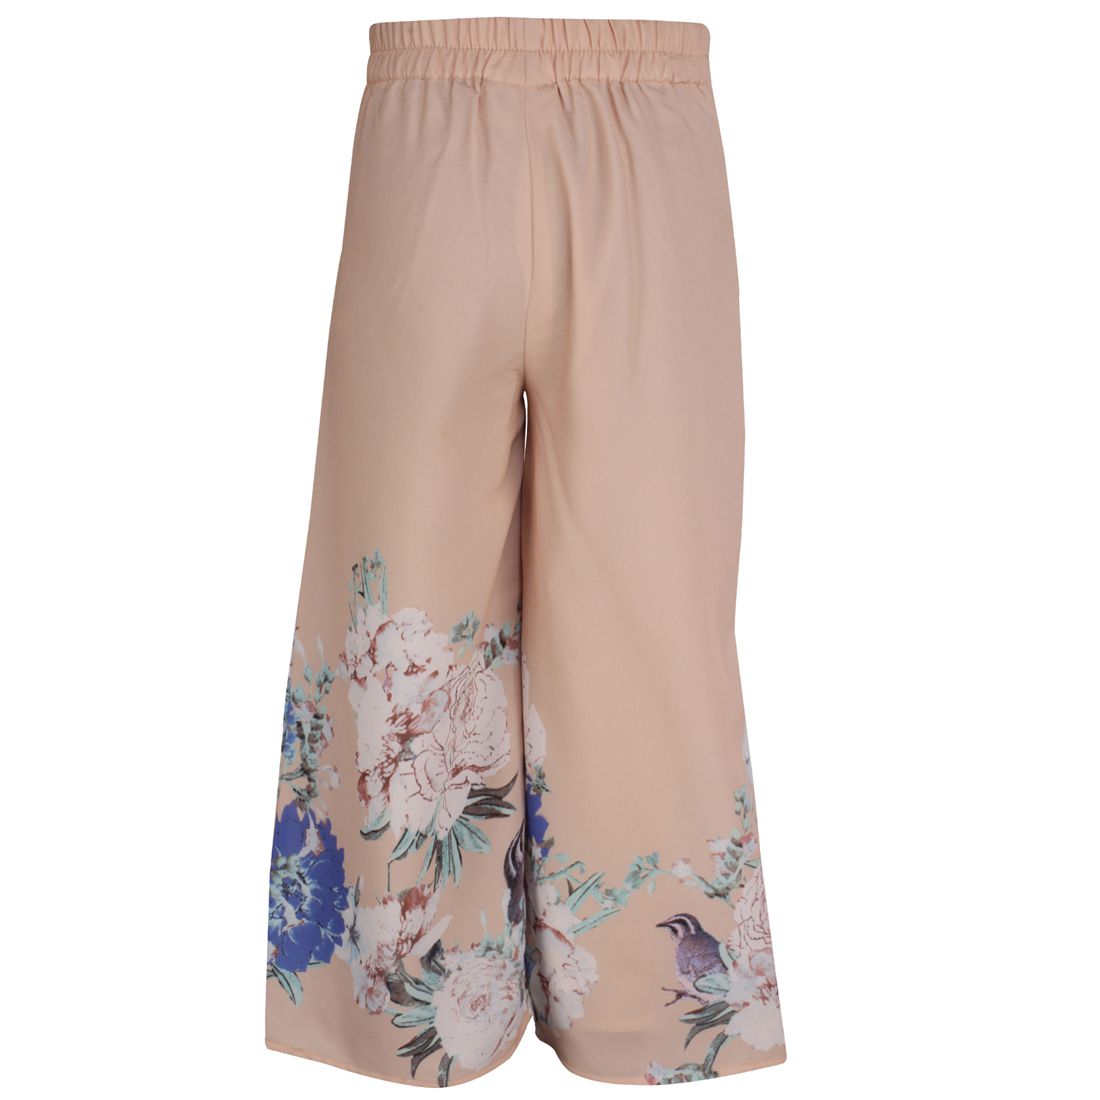 Palazzo For Girls - Buy Palazzo For Girls Online at Low Price - Snapdeal